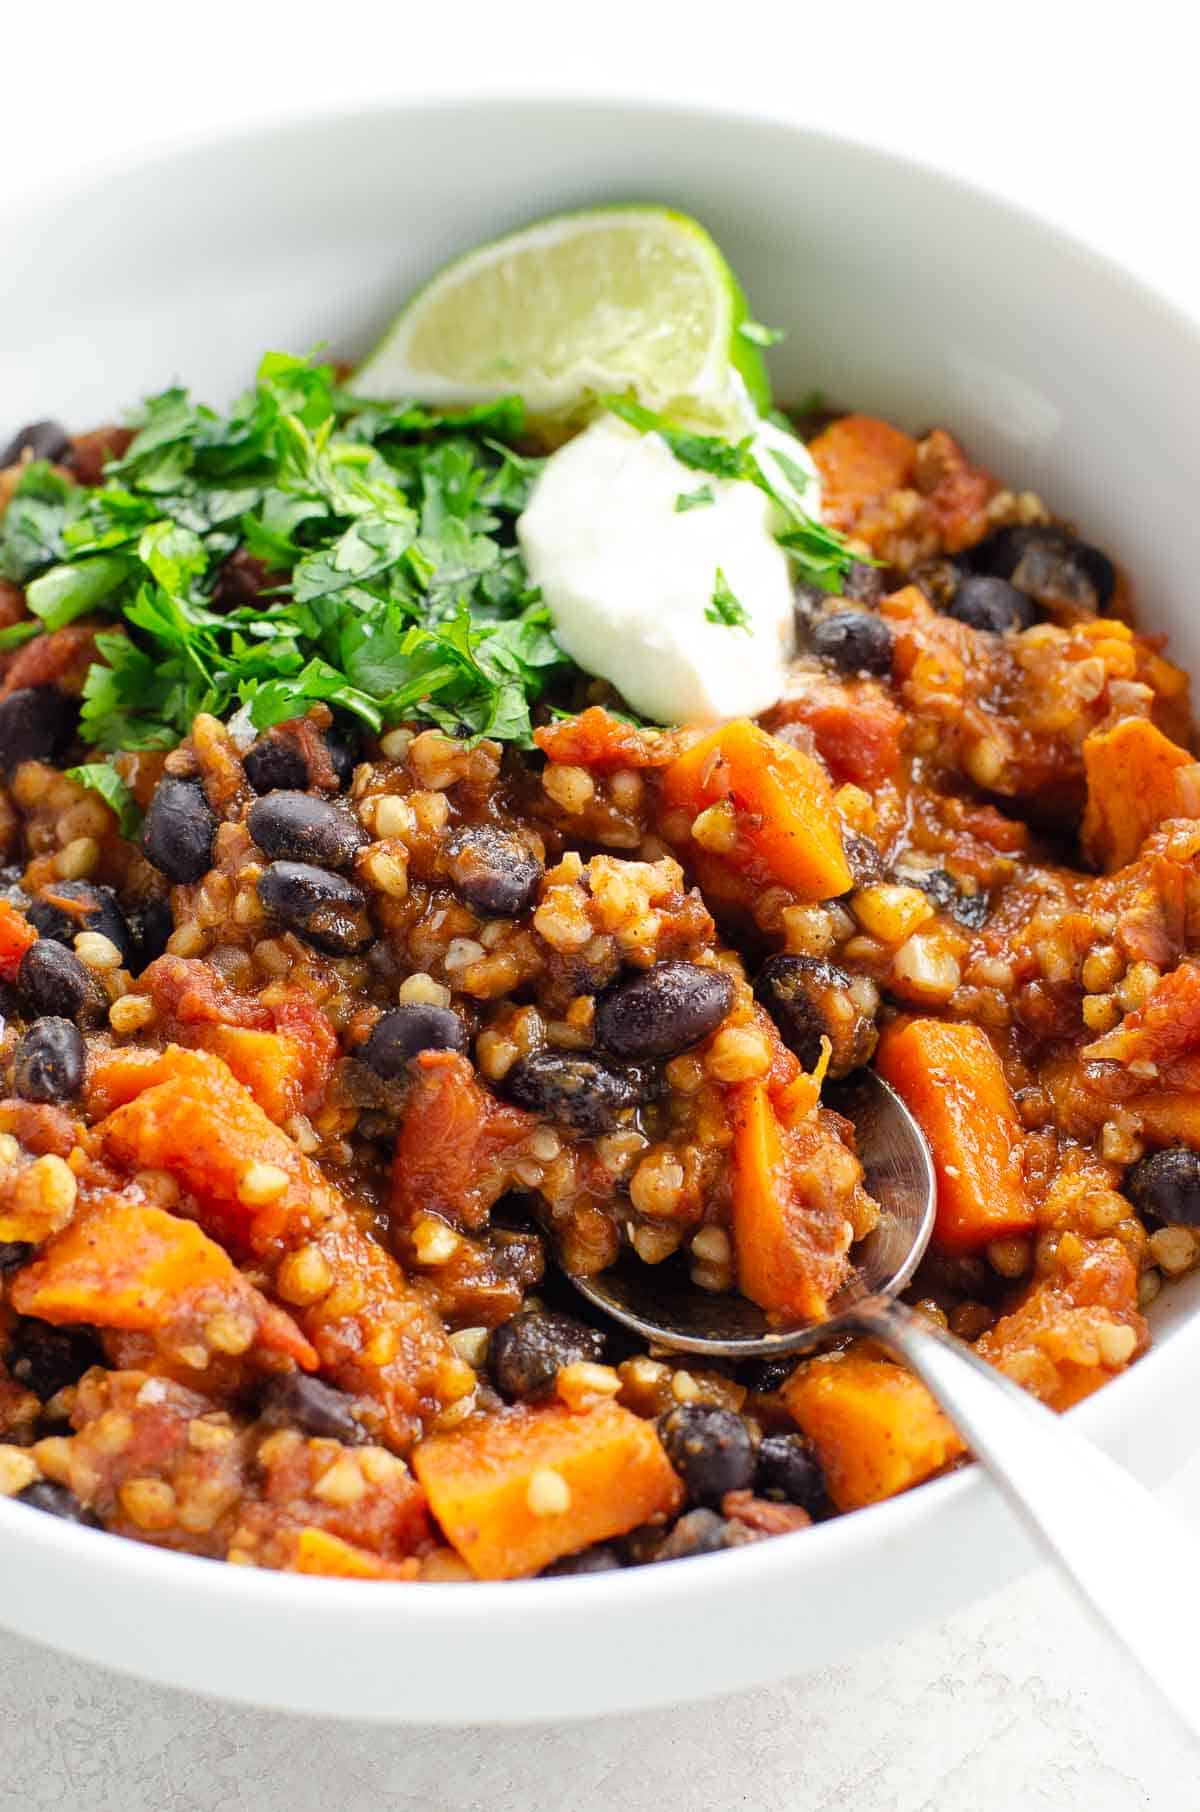 Instant Pot sweet potato chili with black beans, buckwheat, and chipotle in a white bowl garnished with lime, sour cream, and cilantro